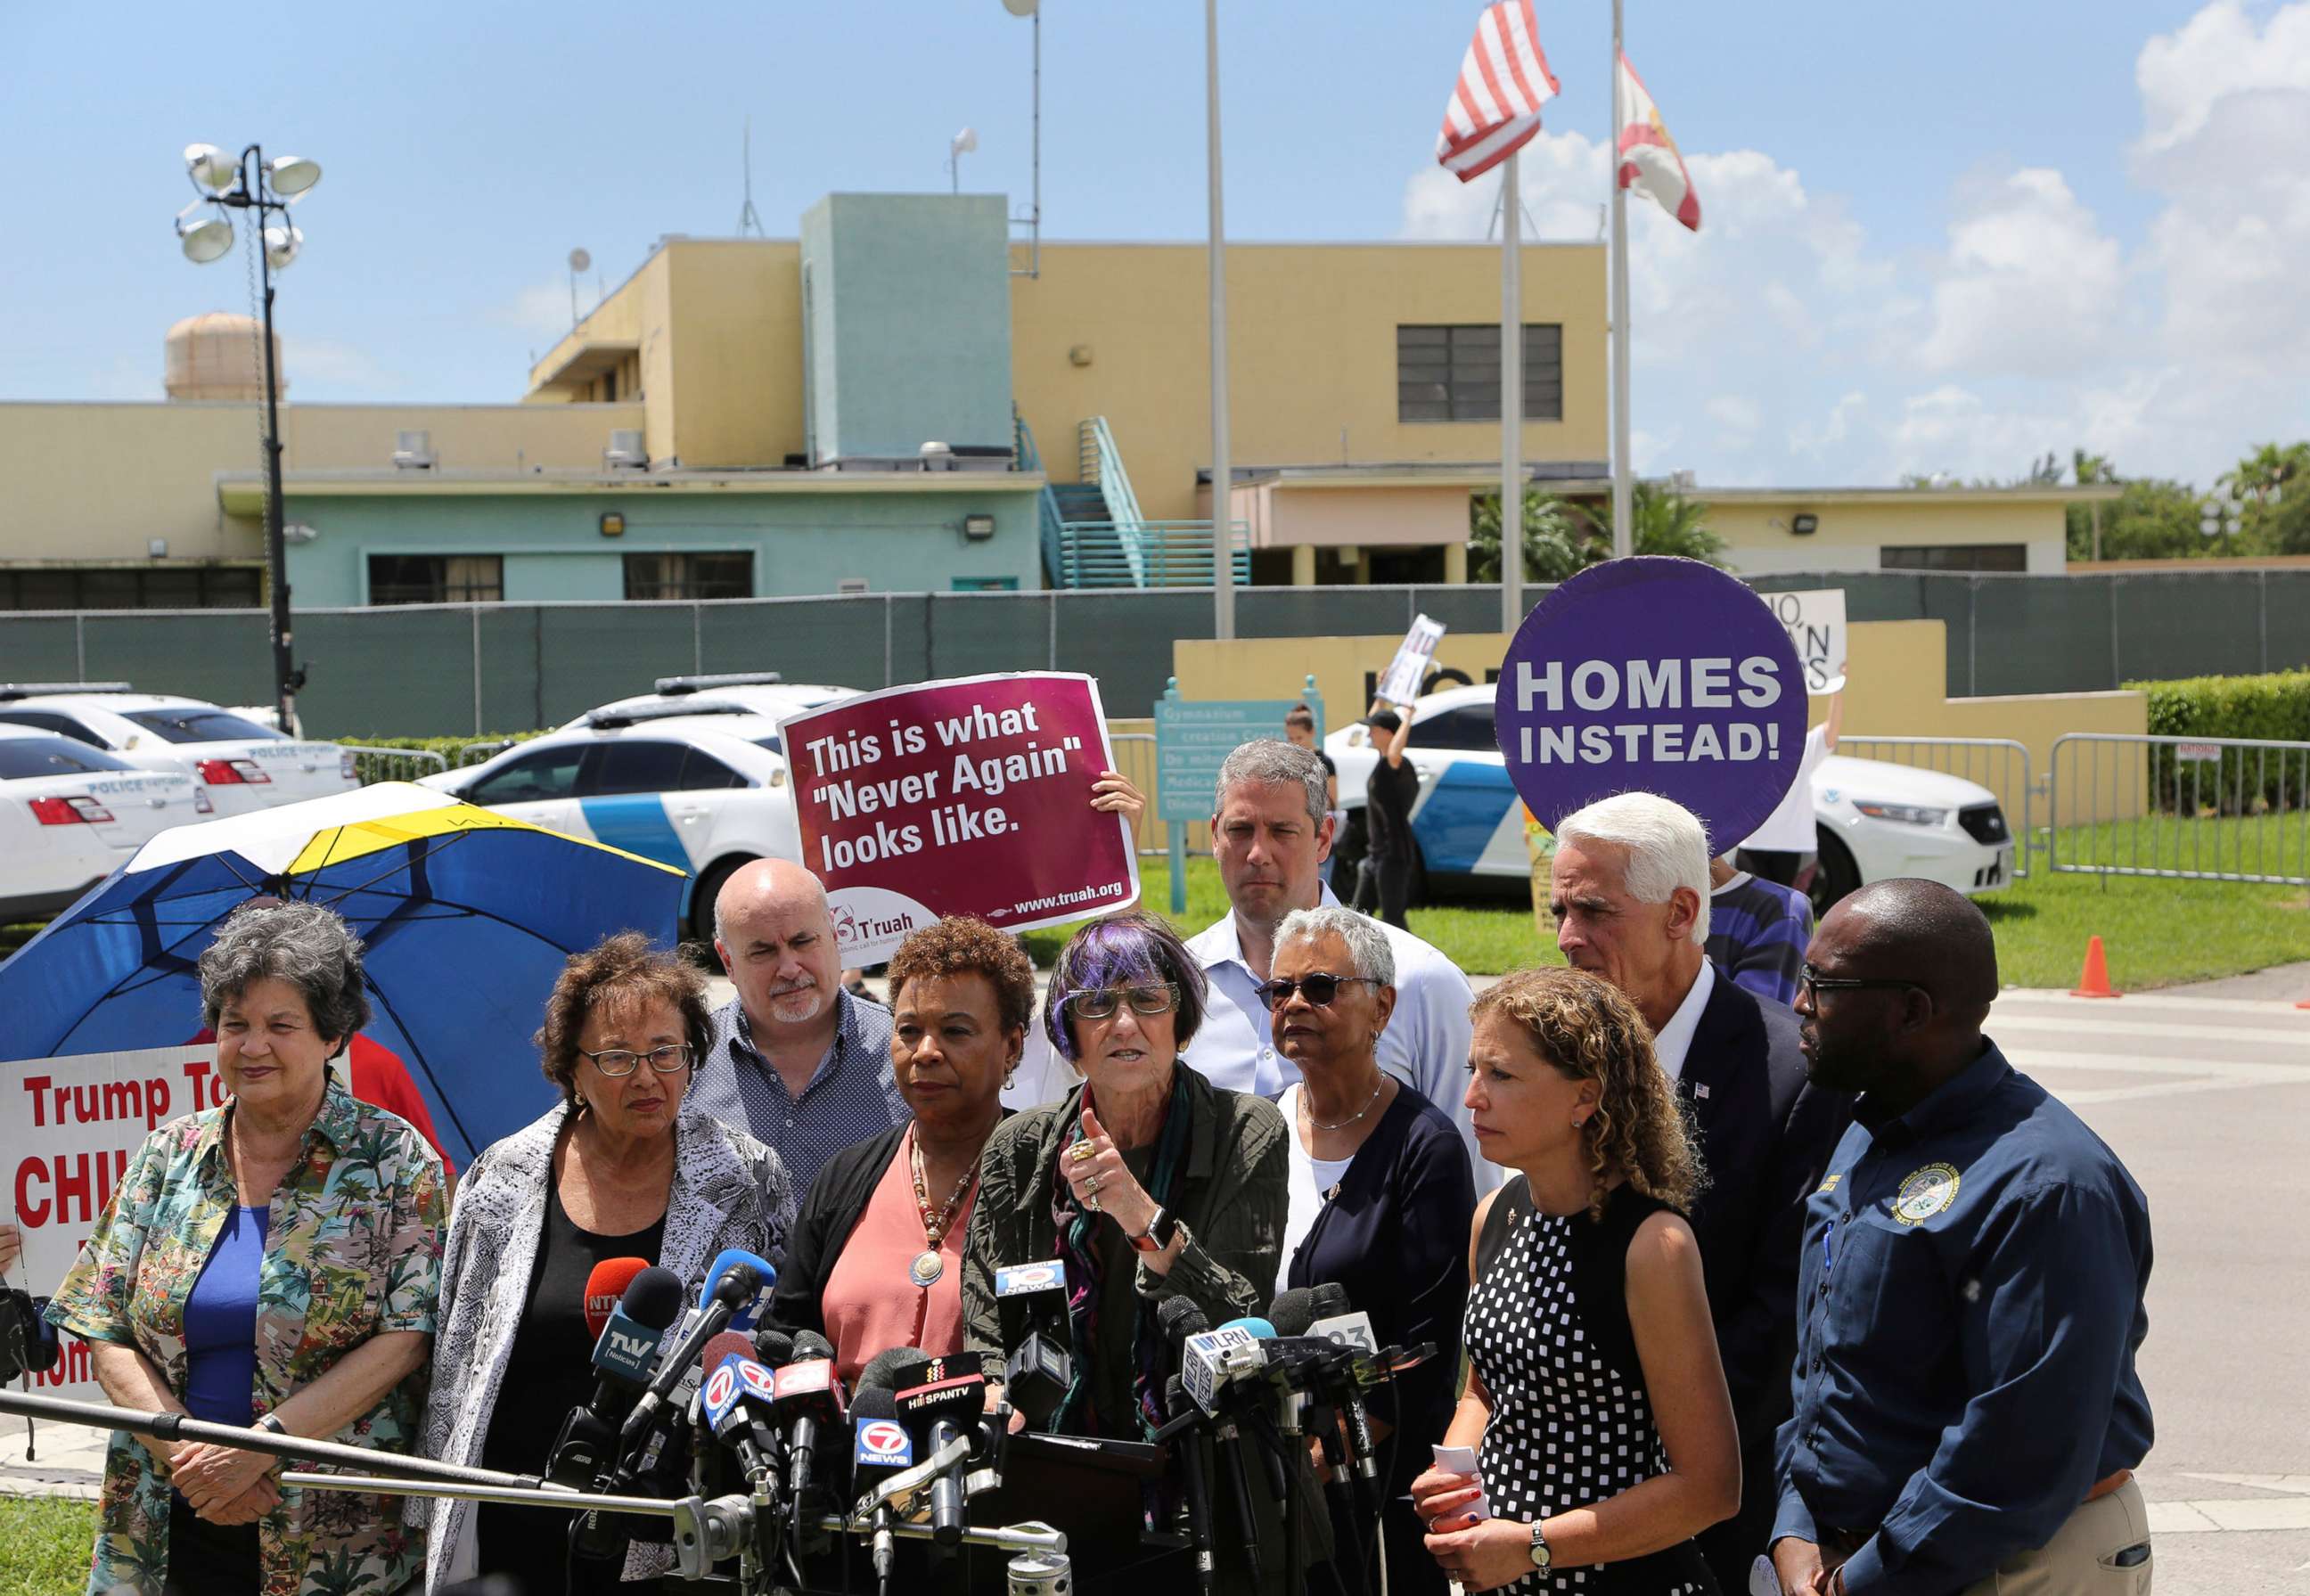 PHOTO: Rep. Rosa DeLauro, center, stands with other members of Congress following a tour of the Homestead Shelter for Unaccompanied Children, July 15, 2019, in Homestead, Fla.